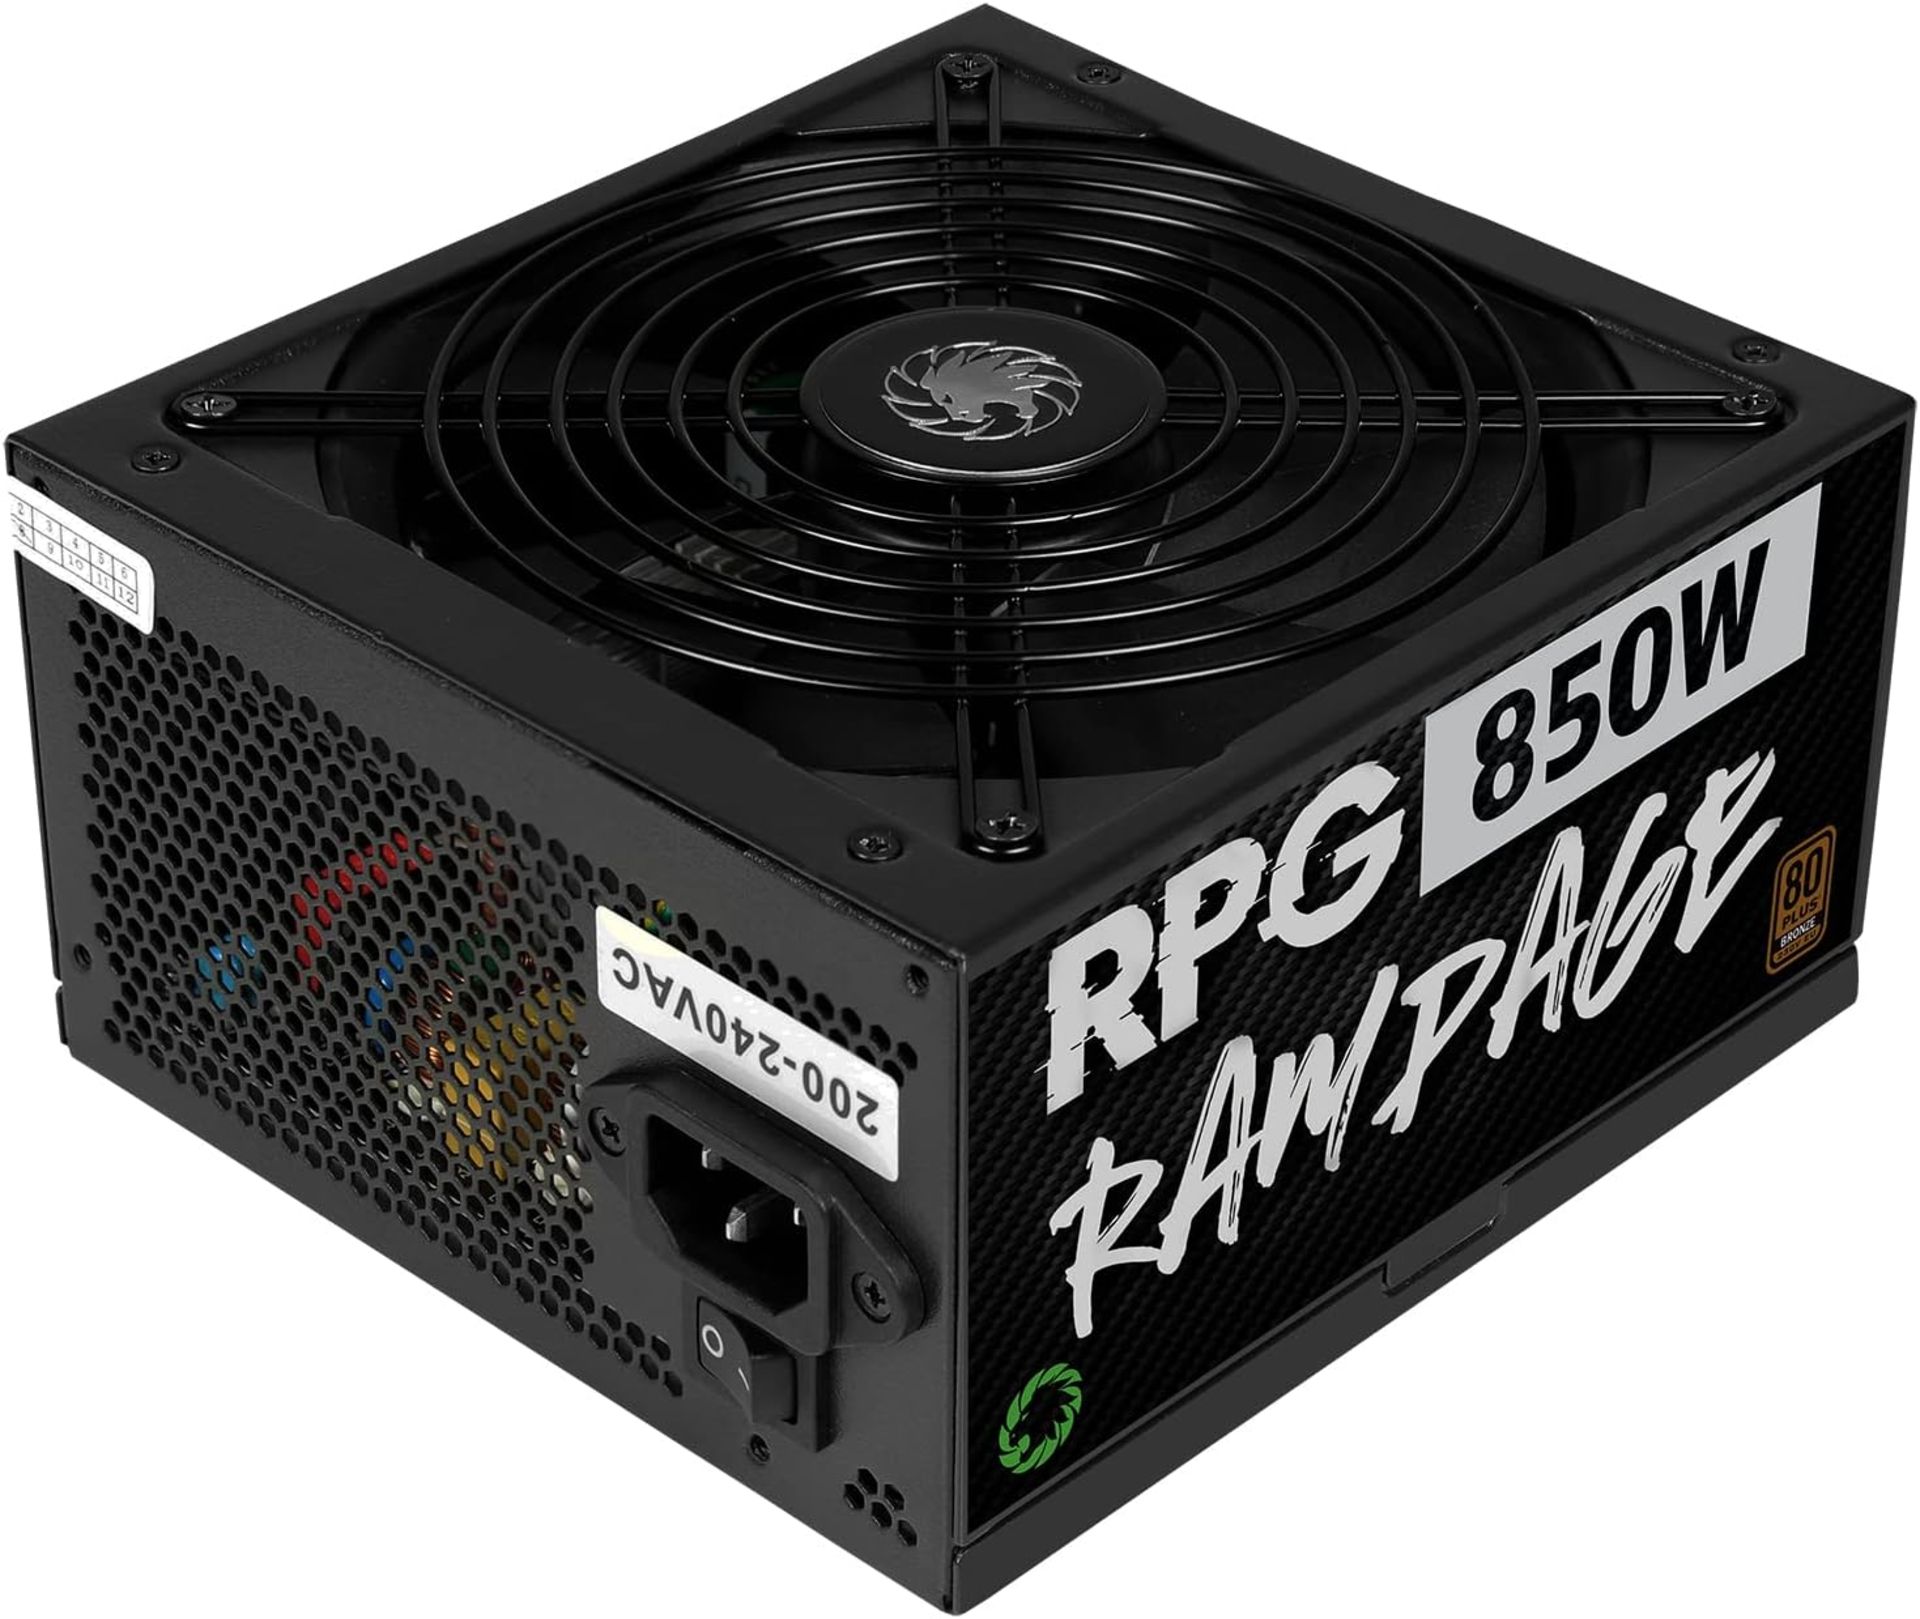 2x NEW & BOXED GAMEMAX Rampage 850w Power Supply. RRP £69.99 EACH. Semi-Modular - The 850W Rampage - Image 8 of 13